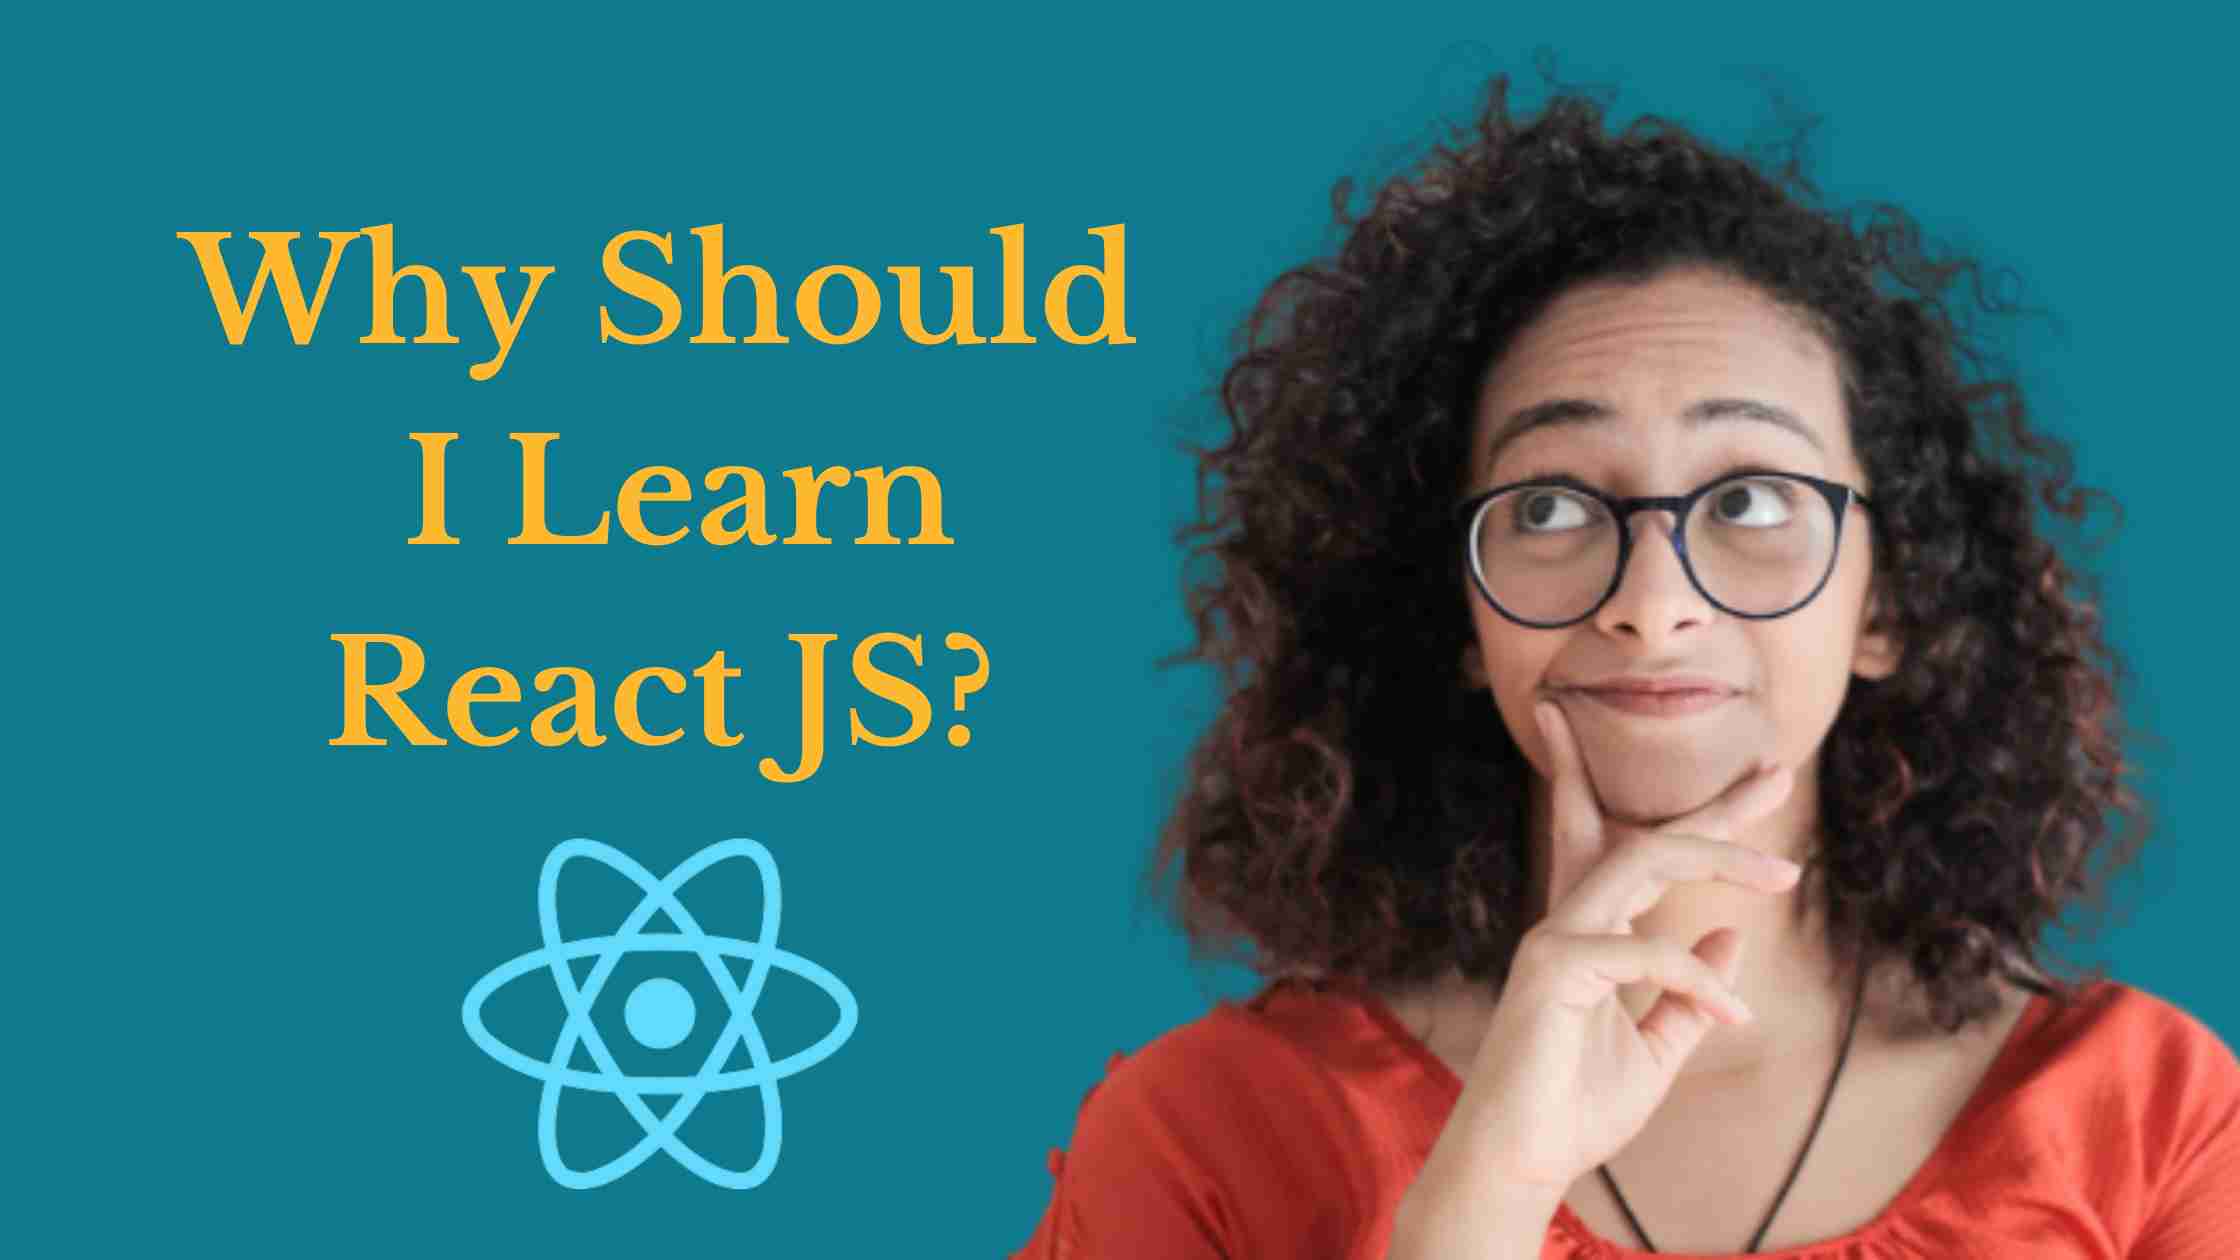 Why Should I Learn React JS?